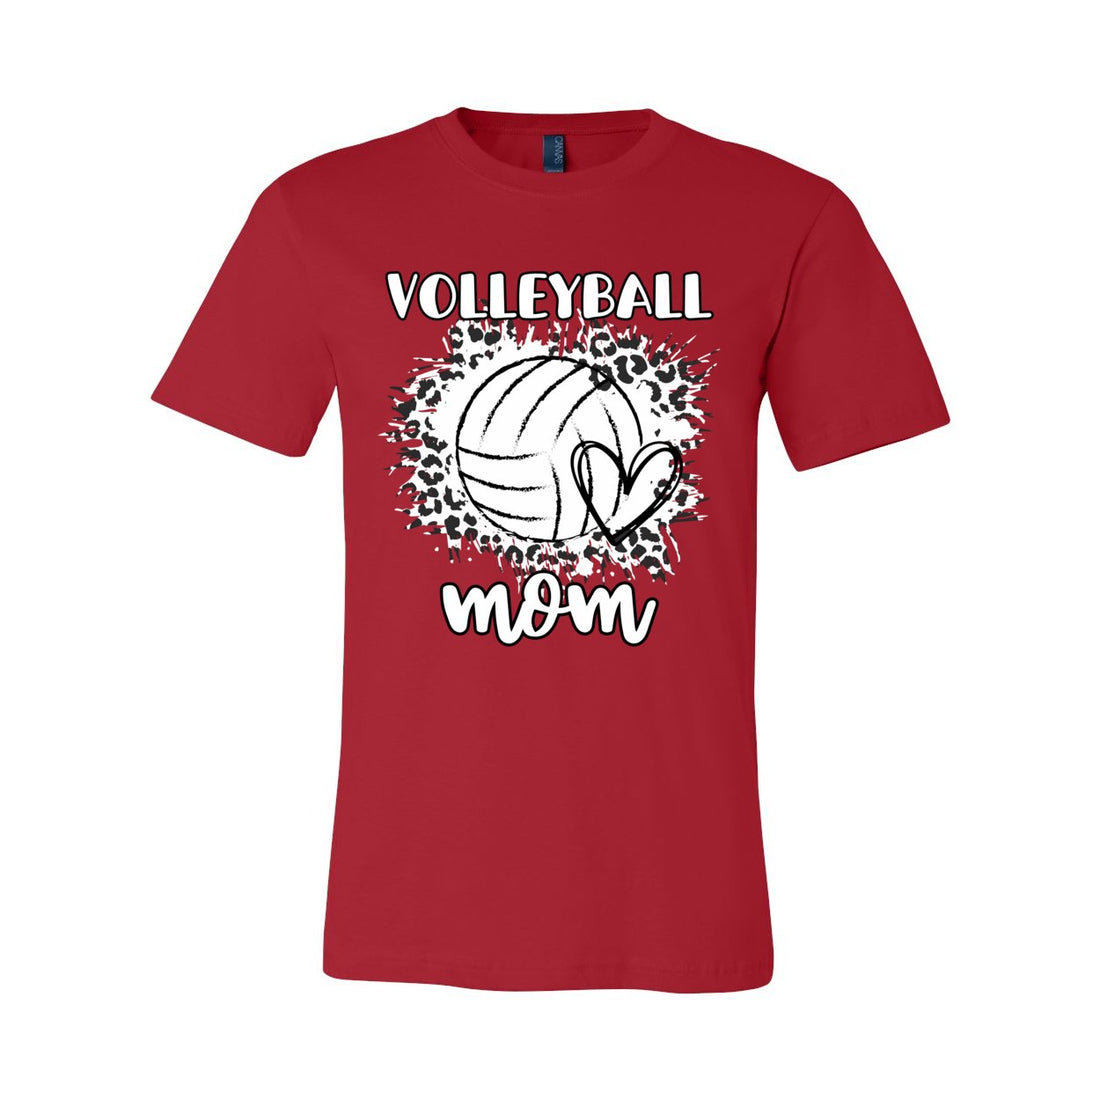 Volleyball Mom - T-Shirts - Positively Sassy - Volleyball Mom